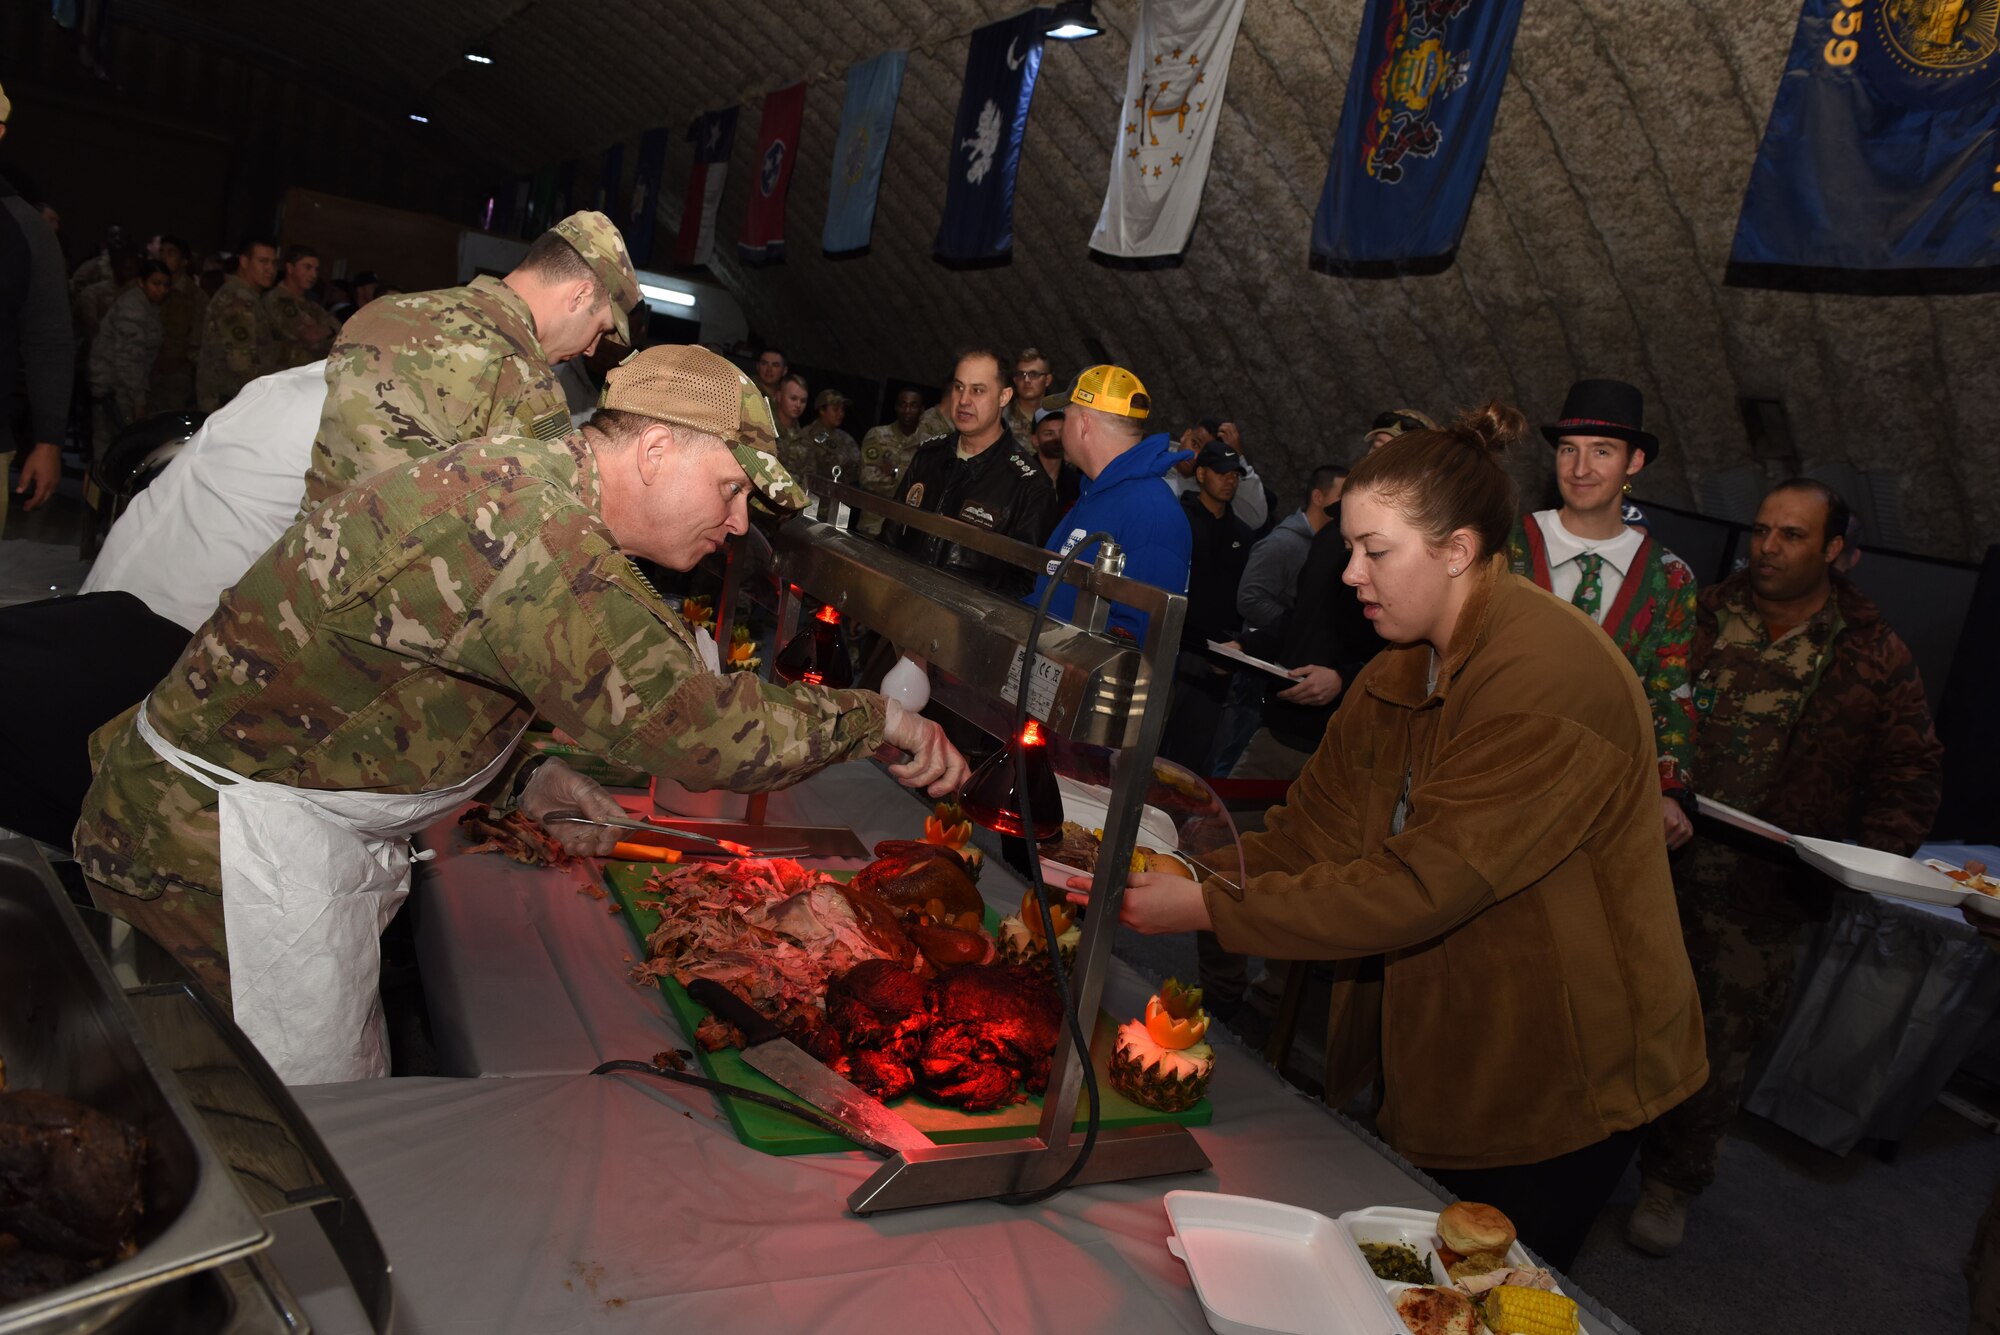 Brig. Gen. Kyle Robinson, 332nd Air Expeditionary Wing commander, serves portions of turkey to service members during a Christmas Day feast, Dec. 25. 2017 in Southwest Asia. Robinson was joined by other members of installation leadership in treating deployed service members to a traditional home-style meal while they're deployed in the region supporting Operation Inherent Resolve. (U.S. Air Force photo by Staff Sgt. Joshua Kleinholz)